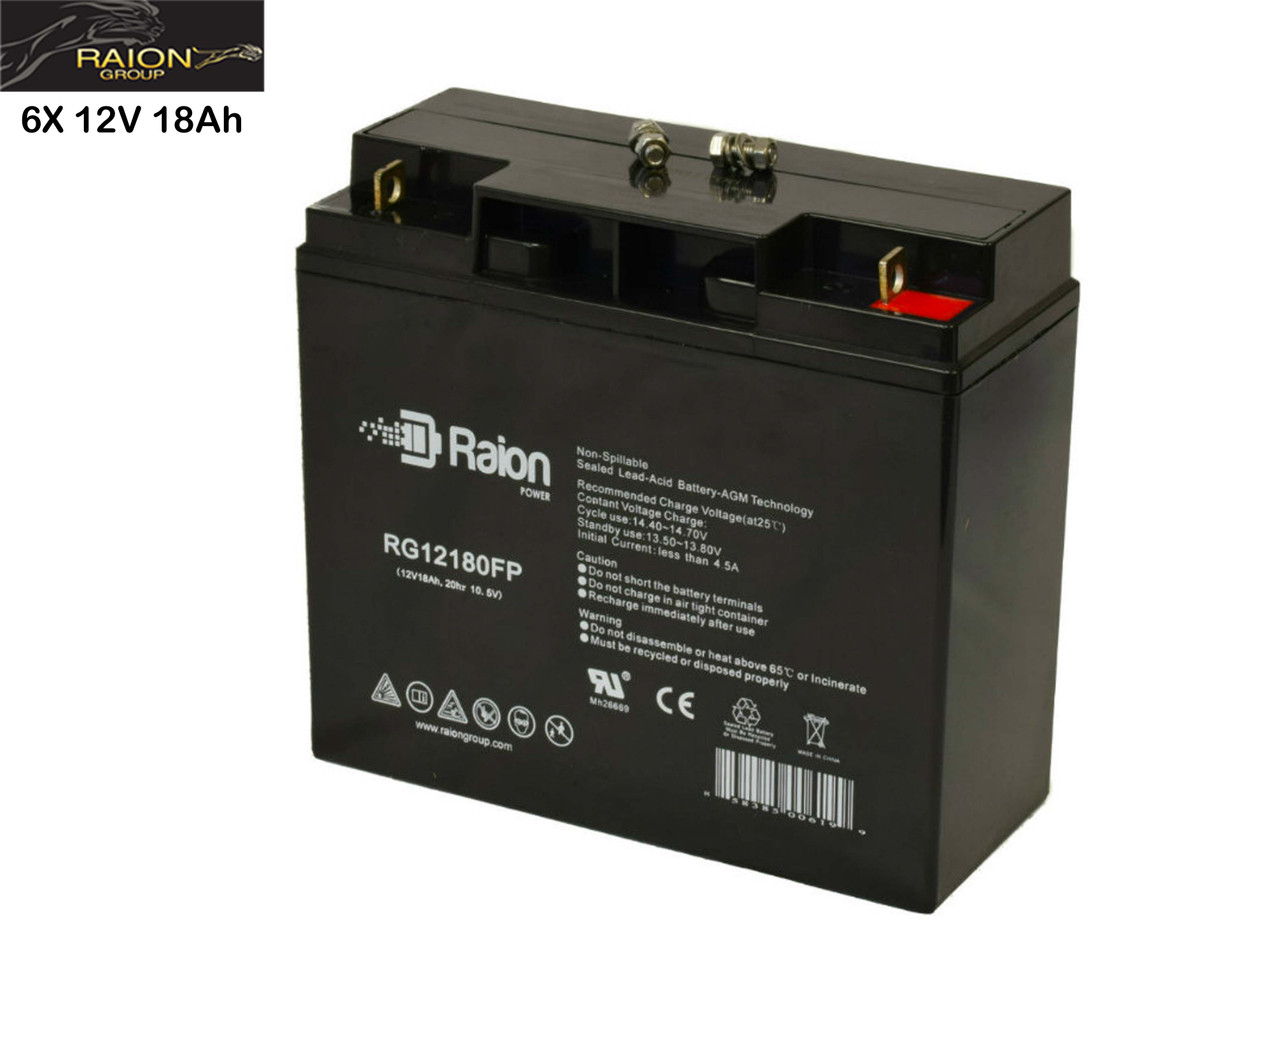 Raion Power Replacement 12V 18Ah Battery for Emmo Knight Sport - 6 Pack